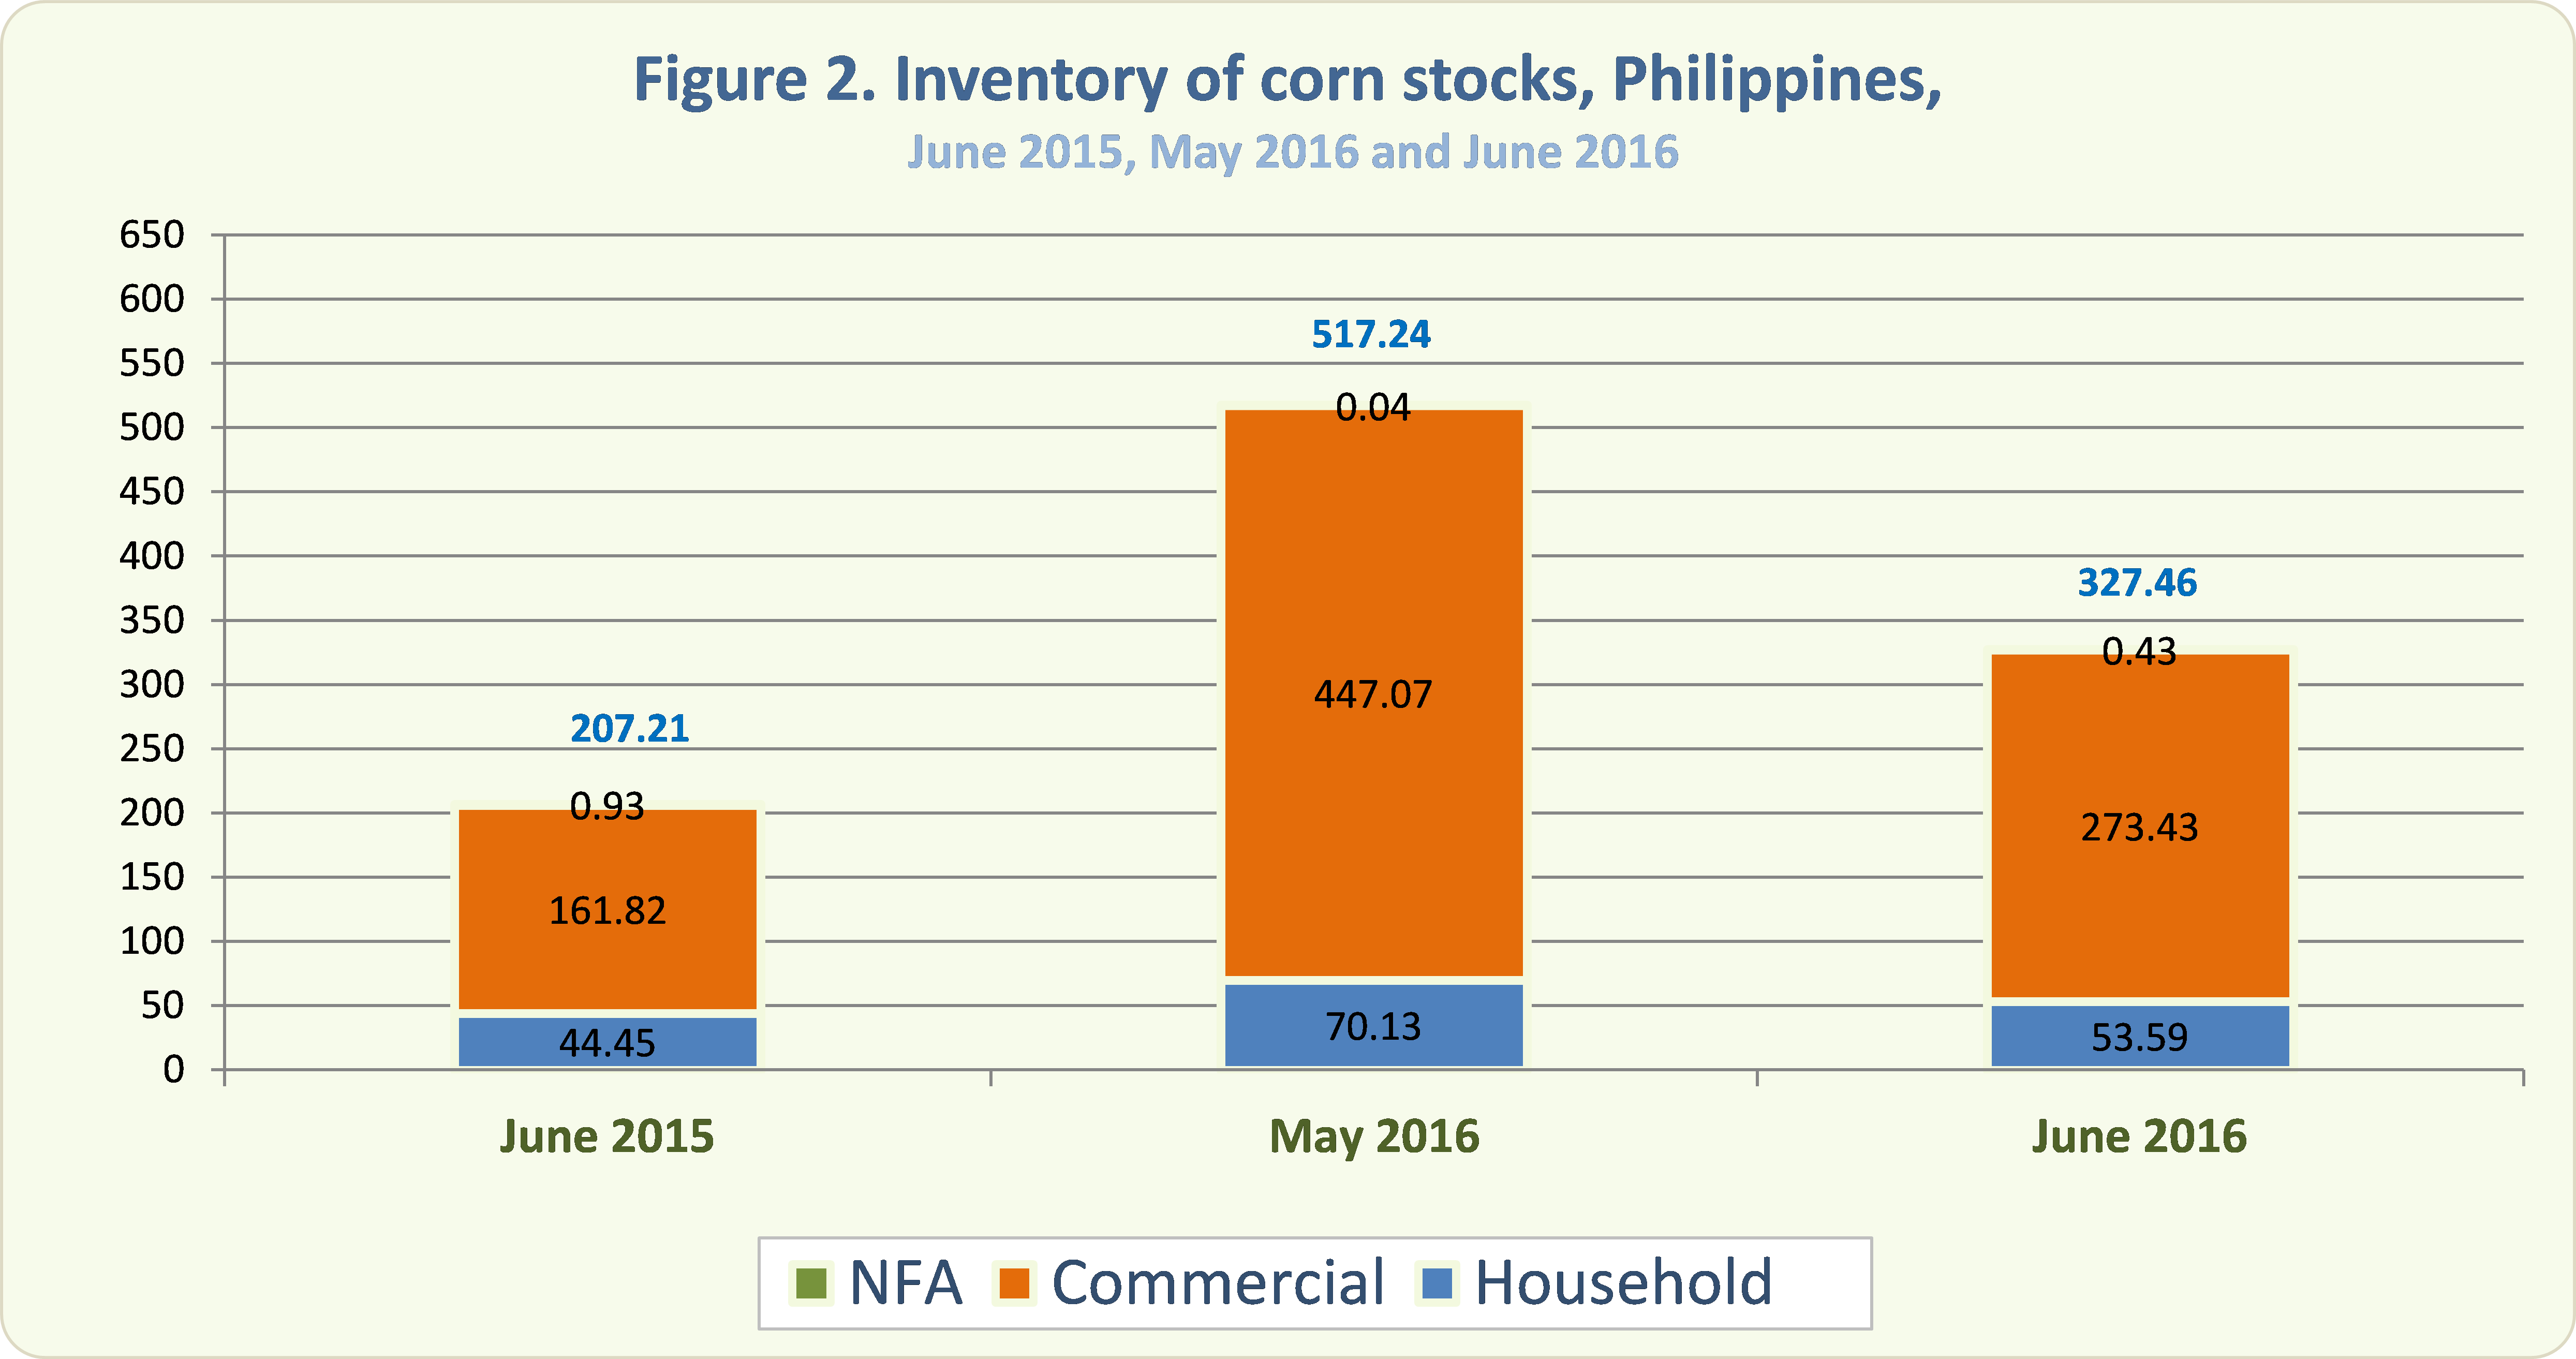 Figure 2 Inventory Rice Stocks June 2015, May 2016 and June 2016